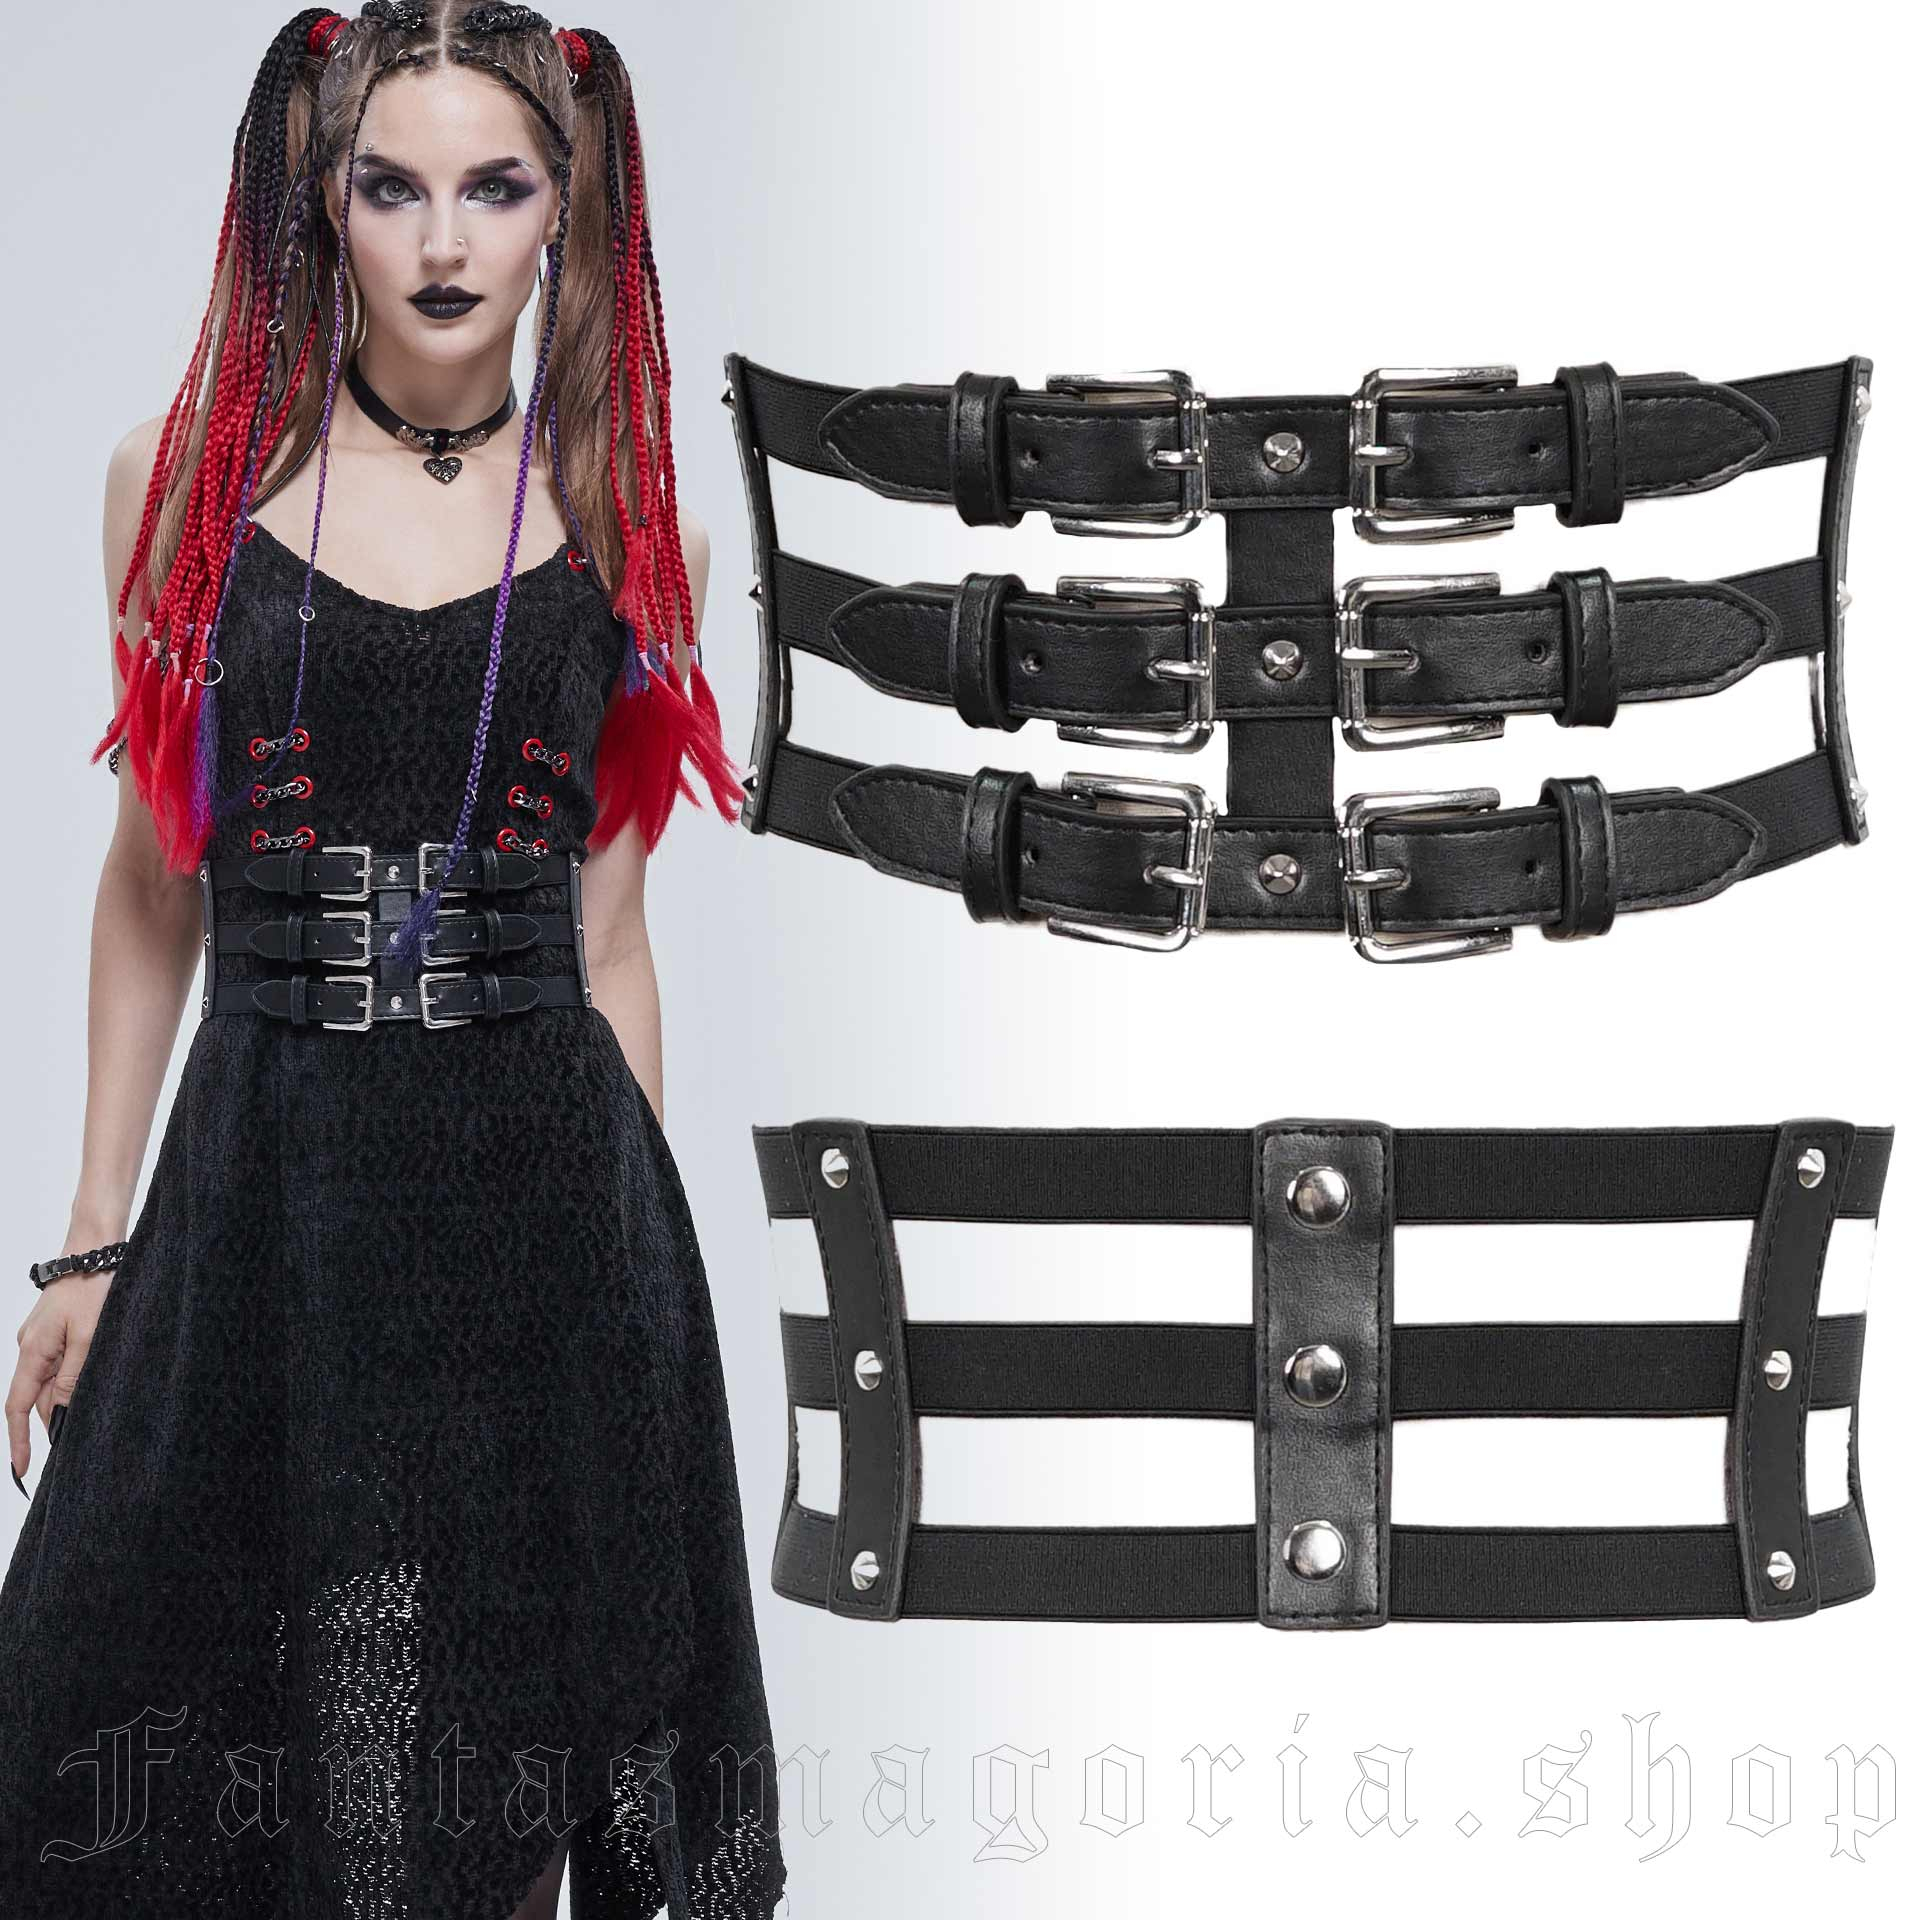 Punk Metal Spiked Gothic Leather Corset | Underbust Hourglass Corsets